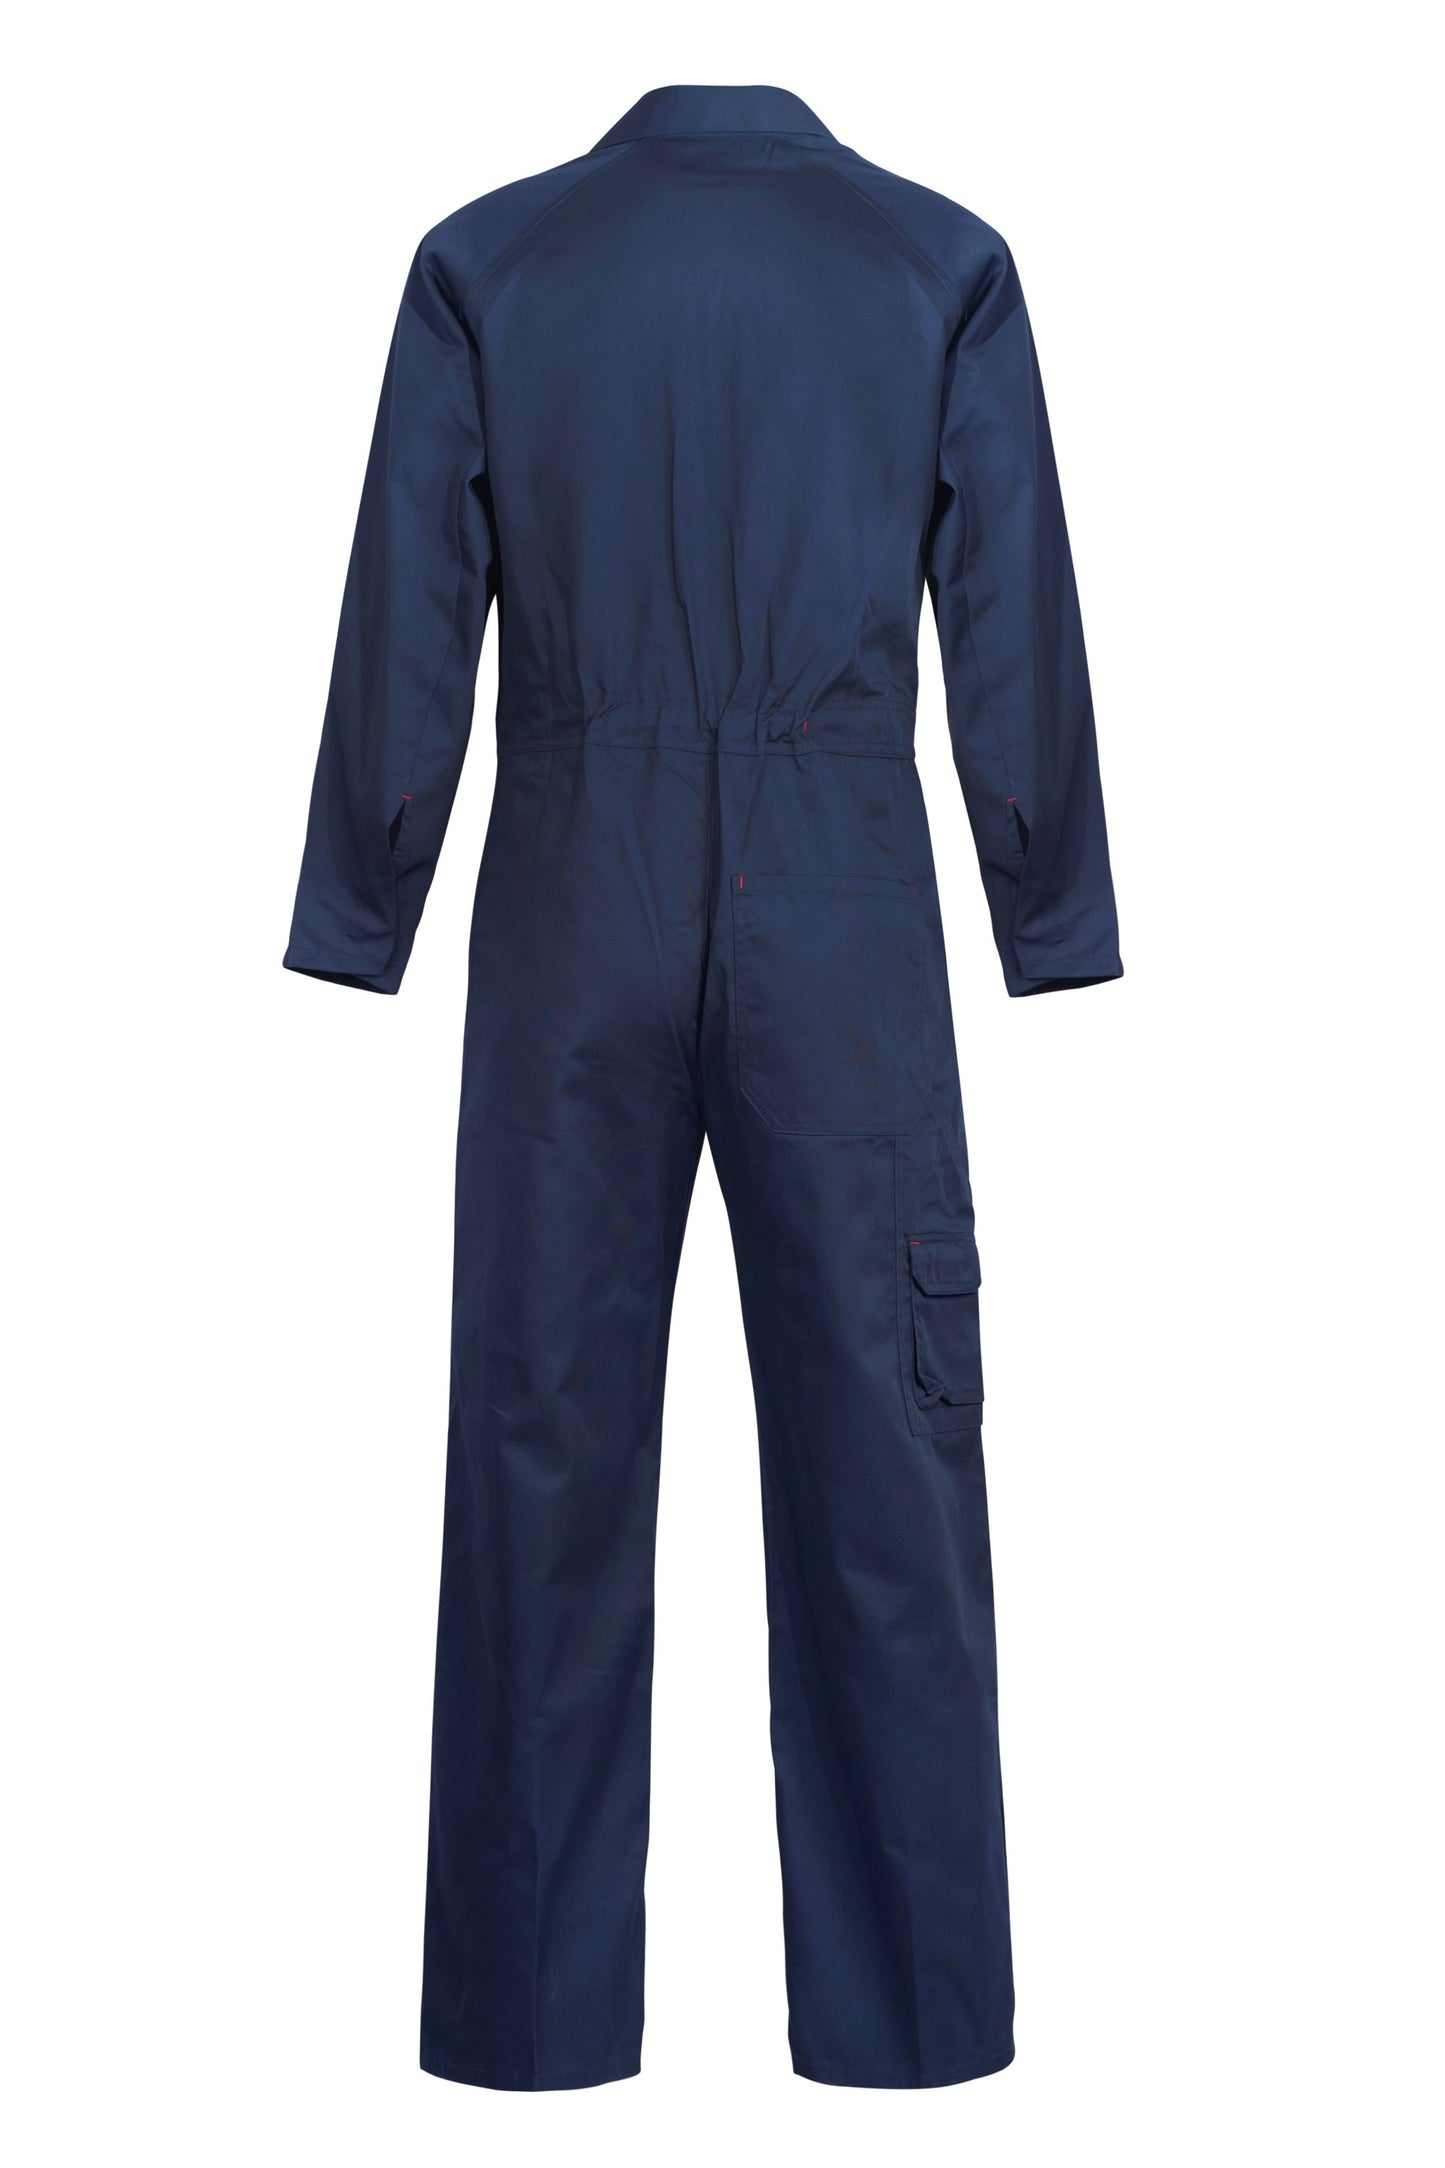 Workcraft - Poly/Cotton Coveralls - WC3058